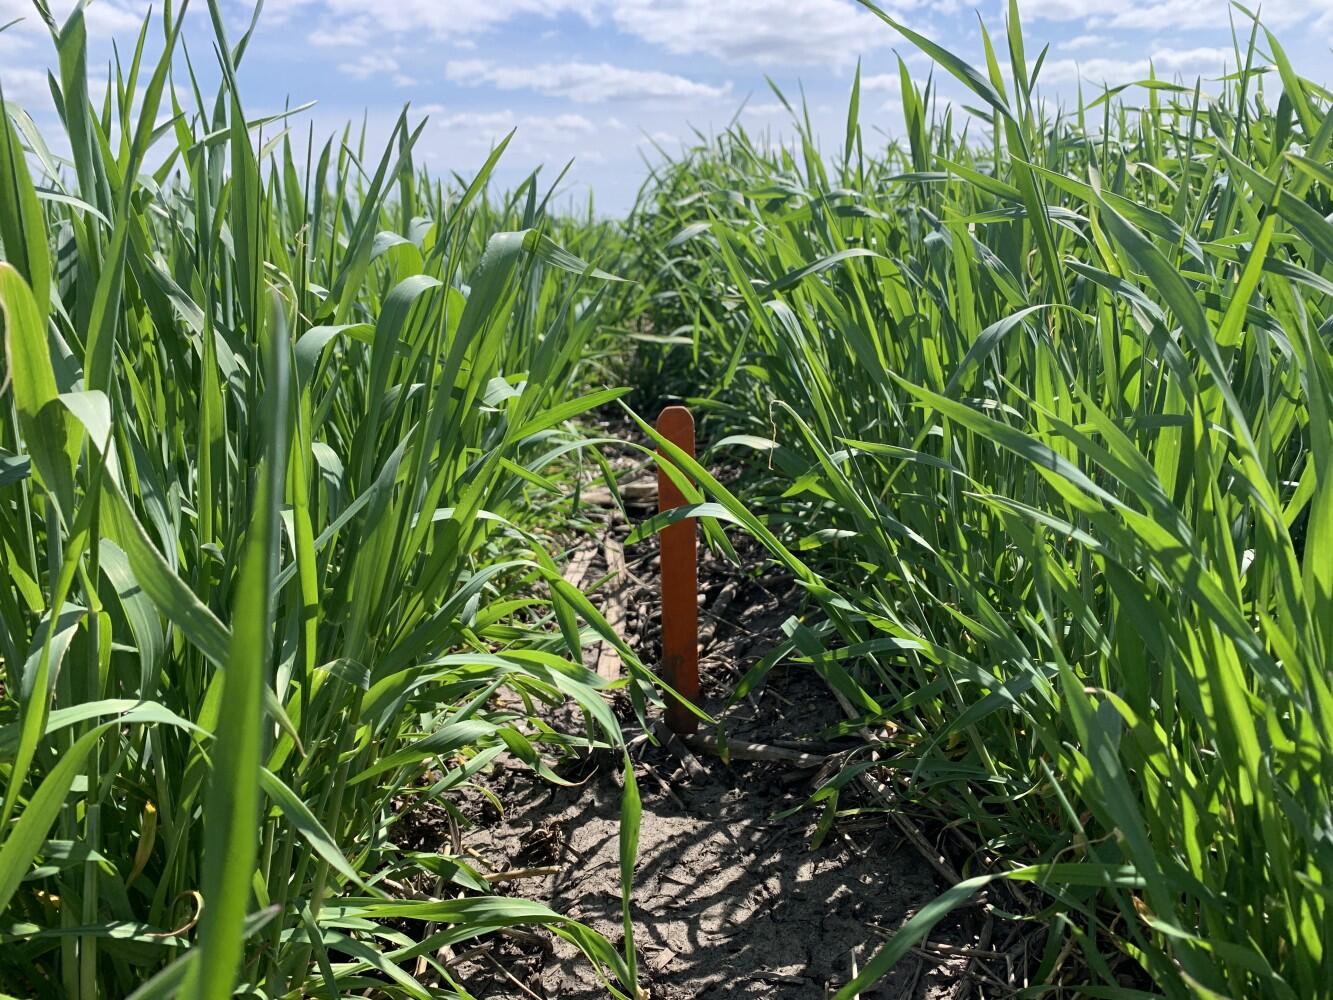 Advanced model and field data add up to better cover crop management